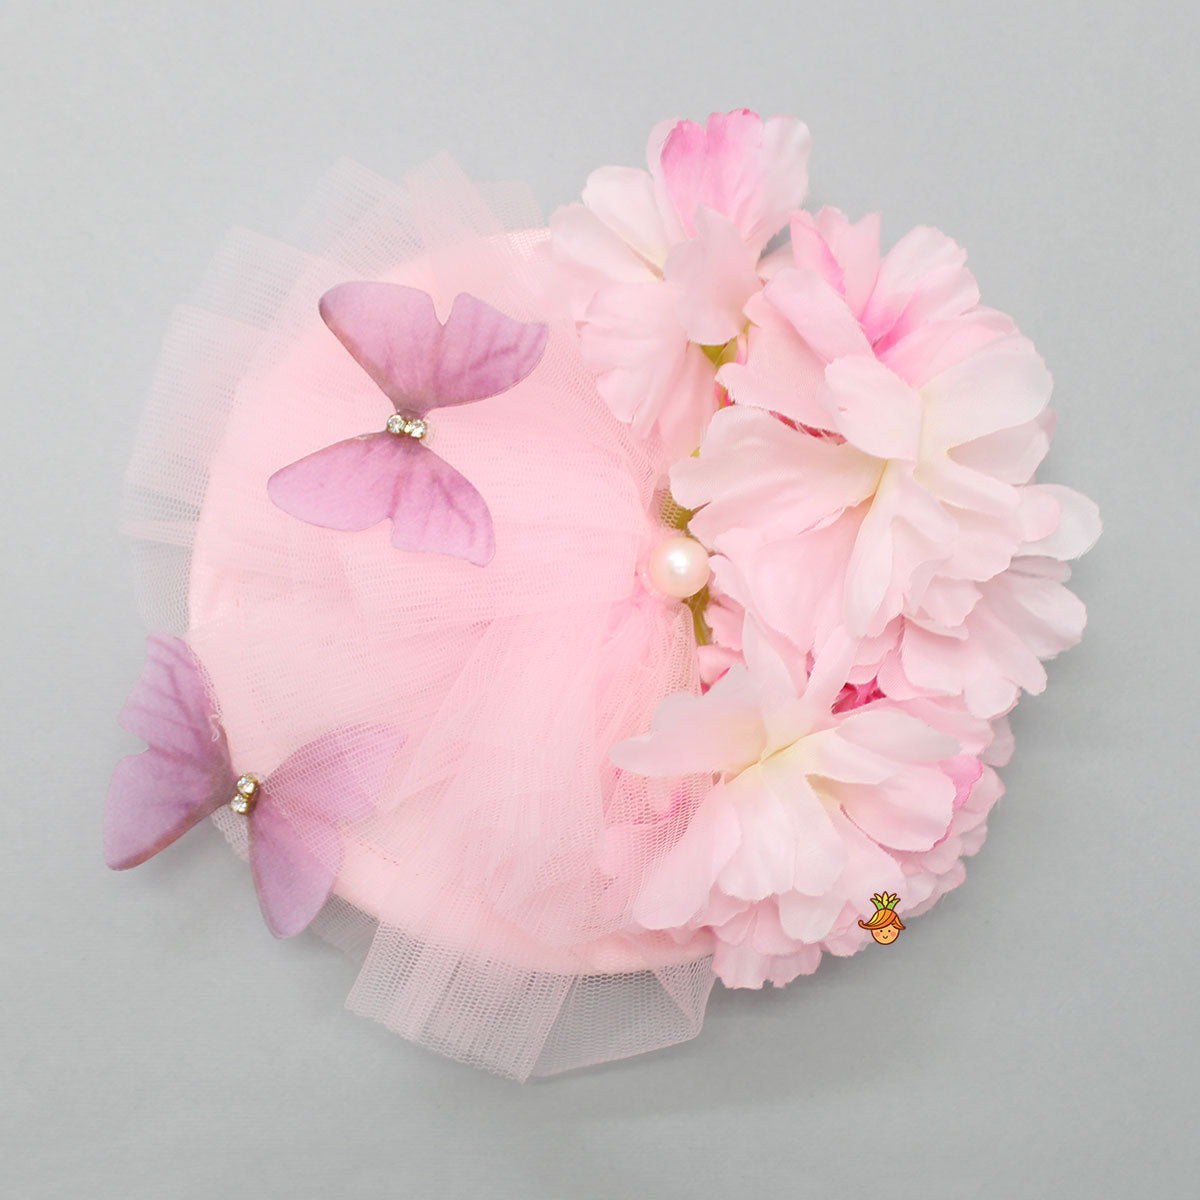 Butterfly And Floral Embellished Frilly Hair Clip